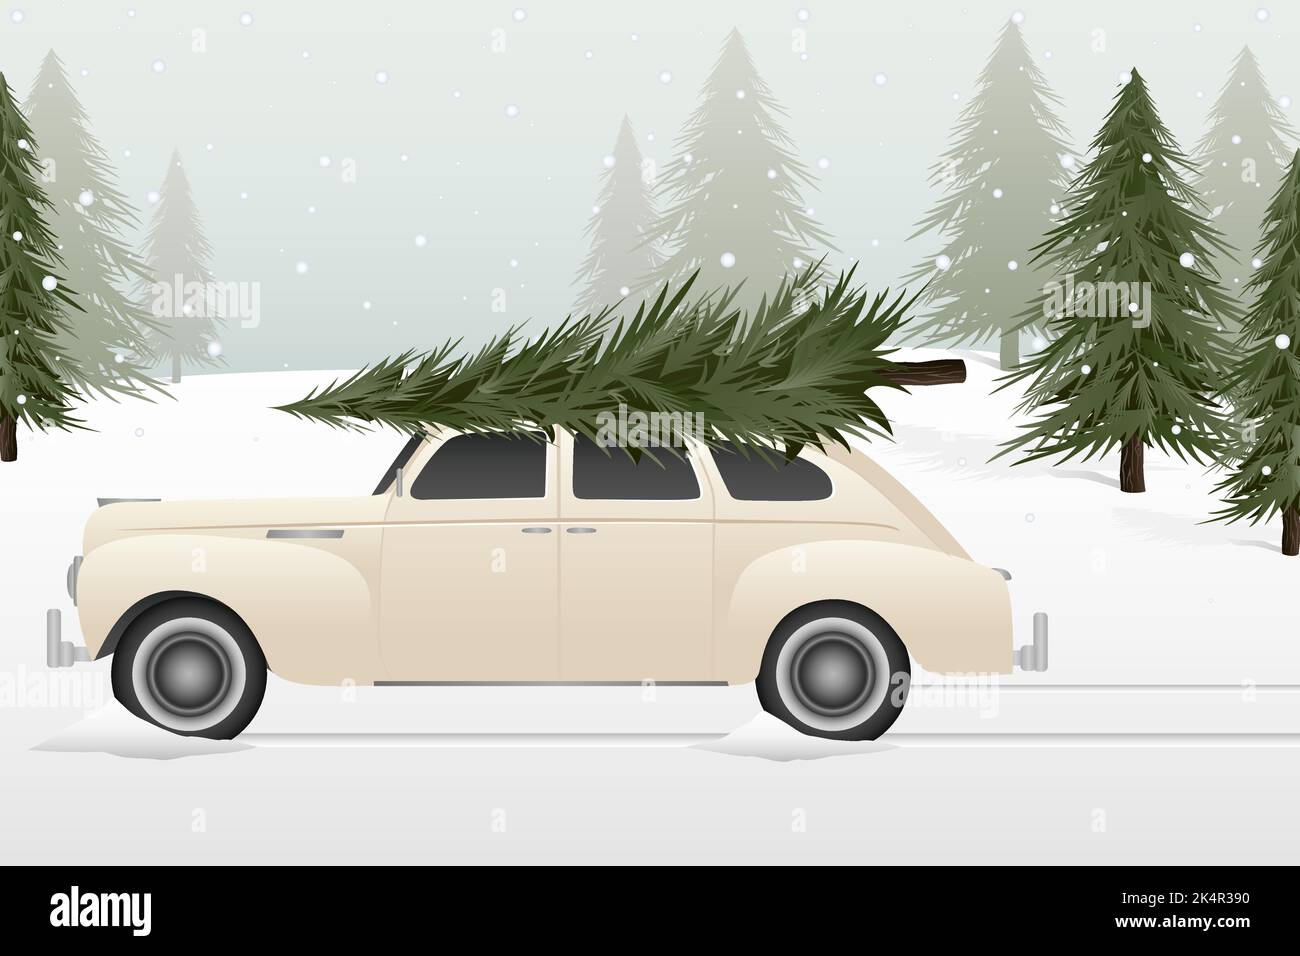 A vintage car with a Christmas tree on top Stock Vector